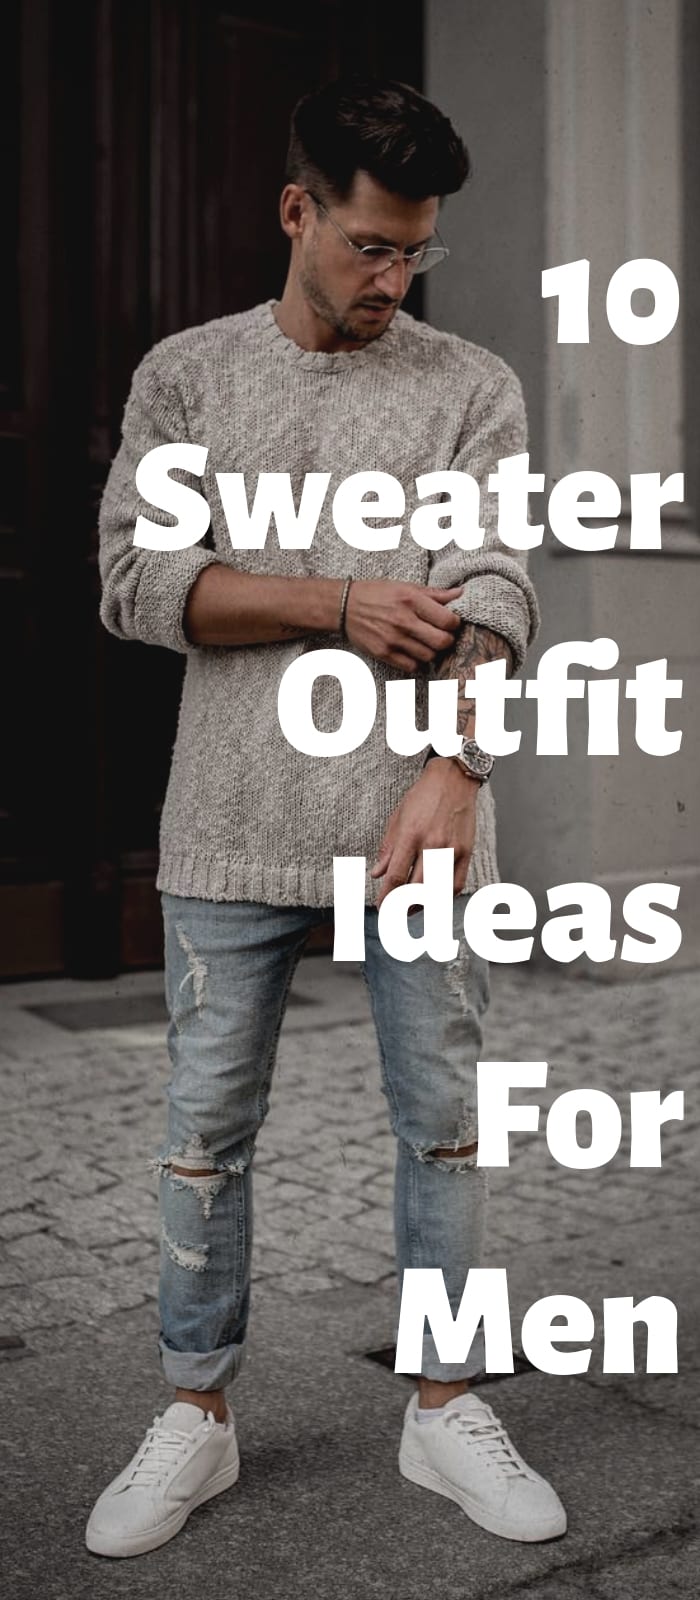 10 Sweater Outfit Ideas For Men!